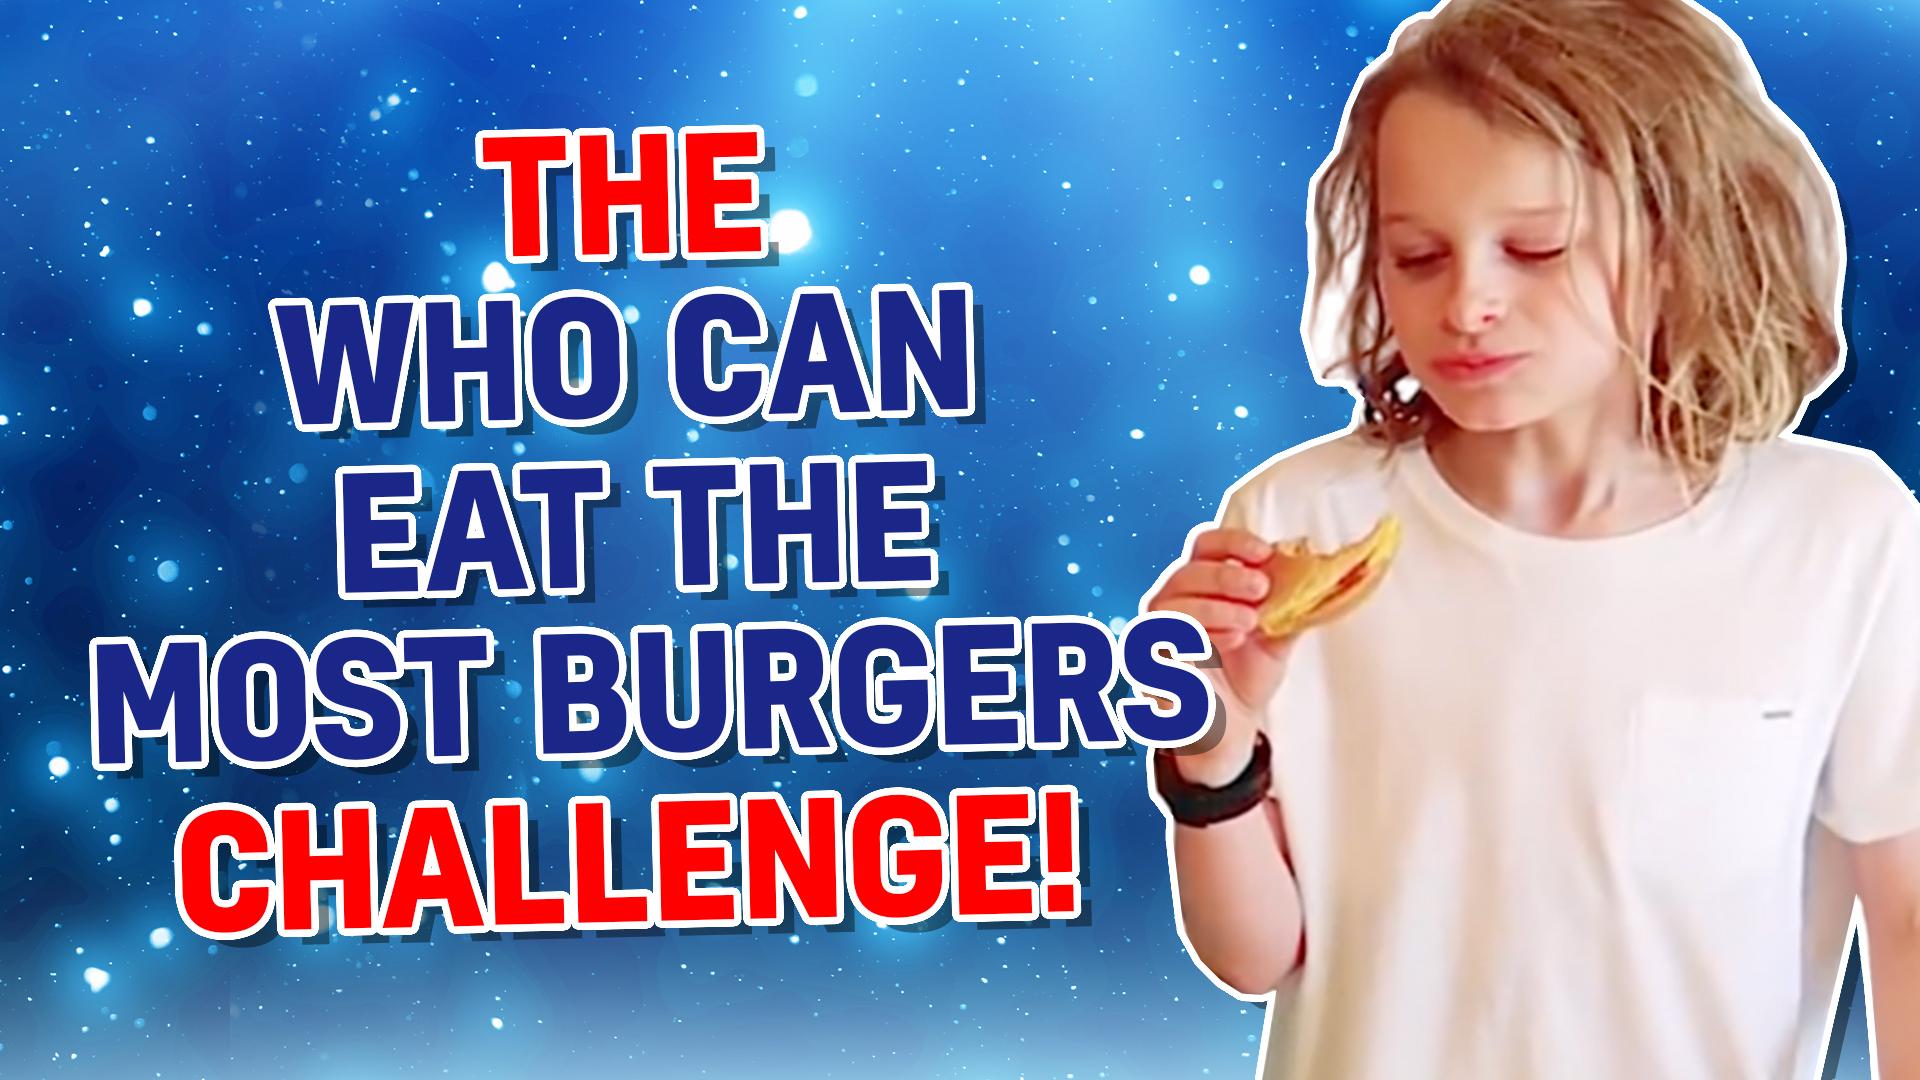 WHO CAN EAT MOST BURGERS